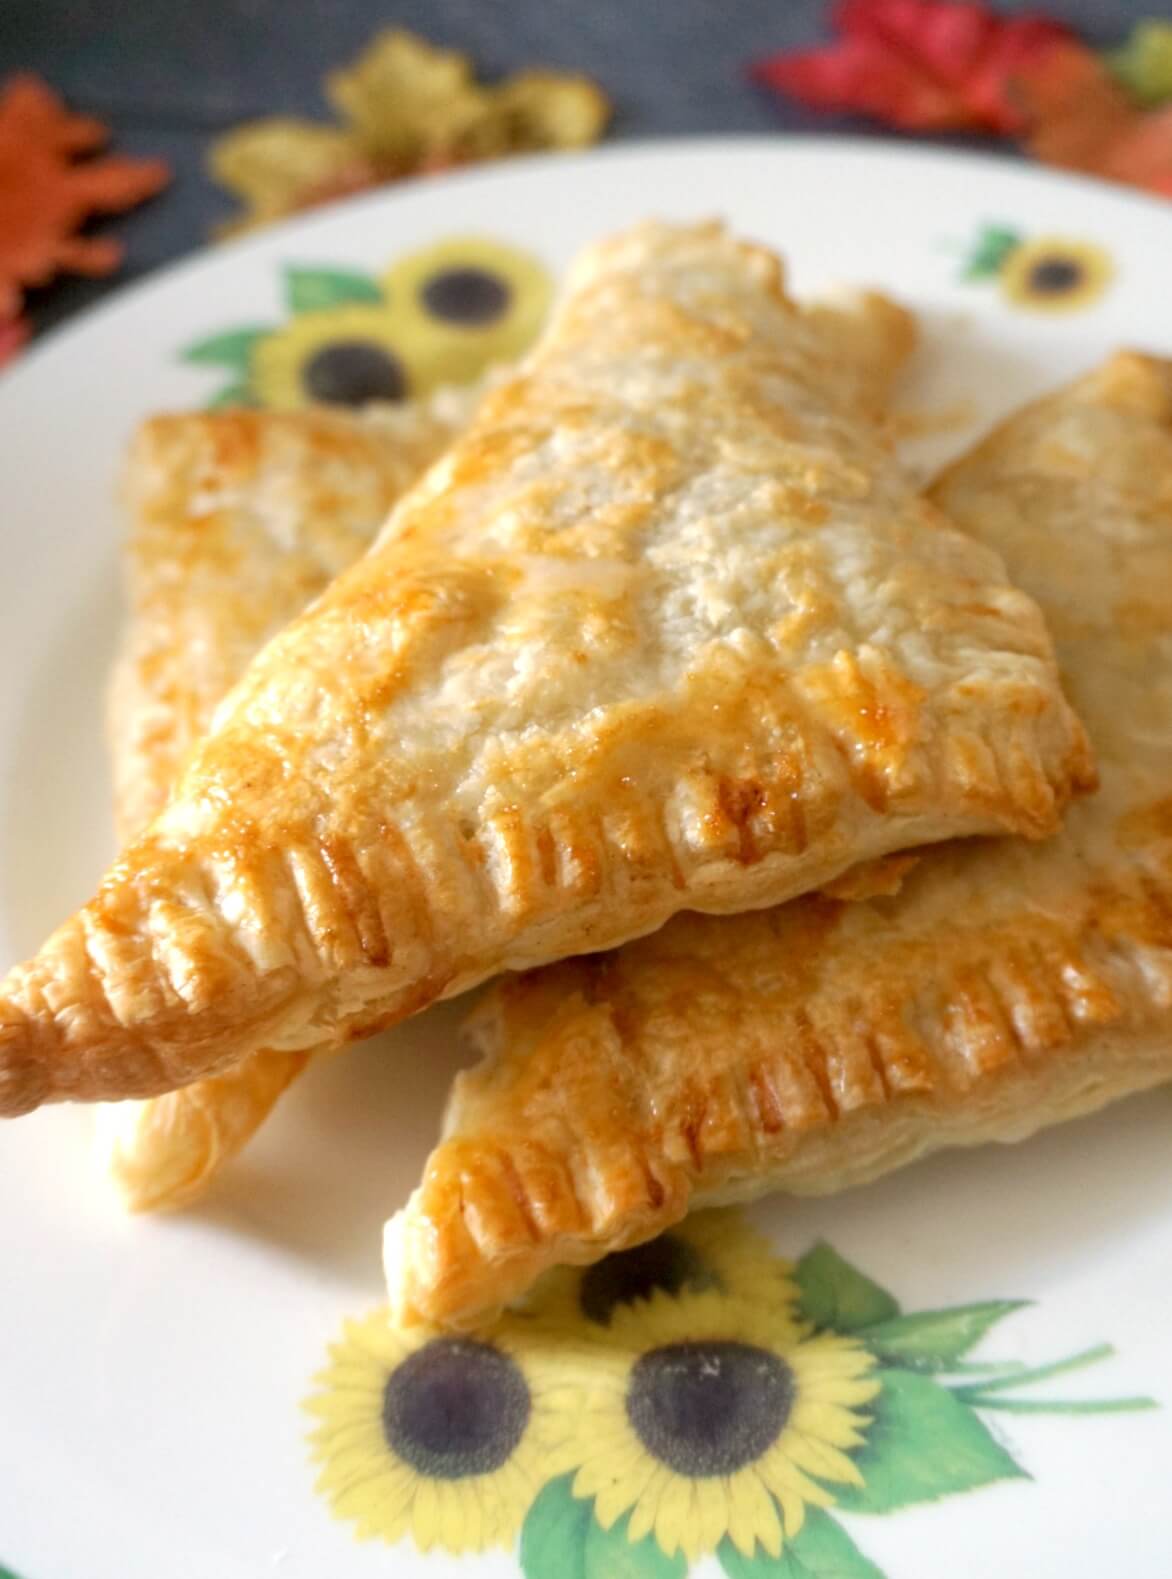 A stack of 3 apple turnovers on a large plate